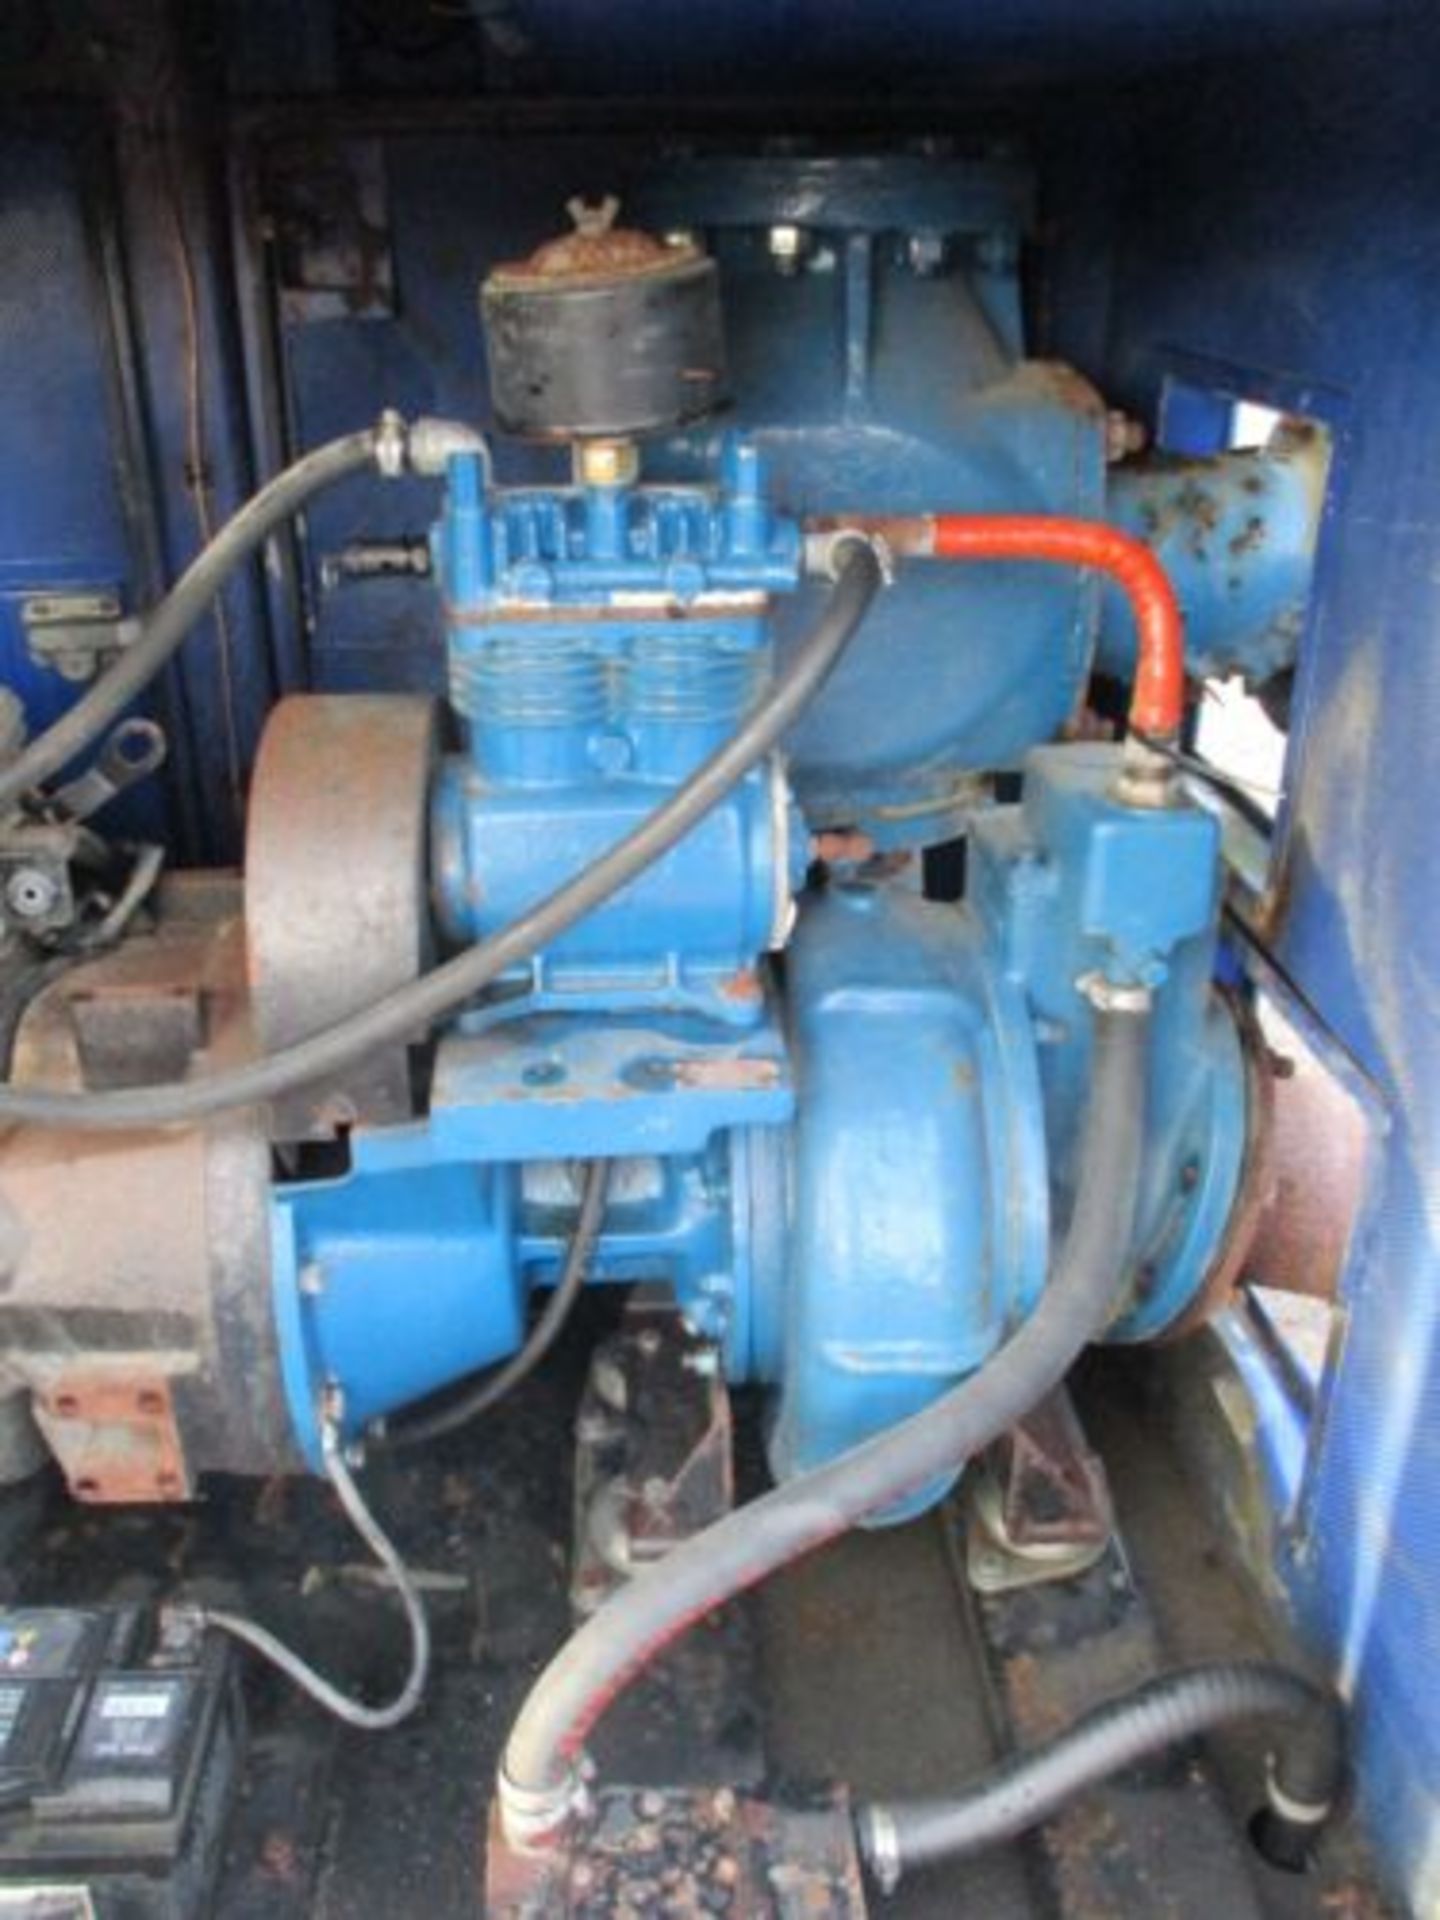 SYKES CP150 6 INCH " WATER PUMP ISUZU DIESEL ENGINE GODWIN DELIVERY ARRANGED - Image 6 of 8